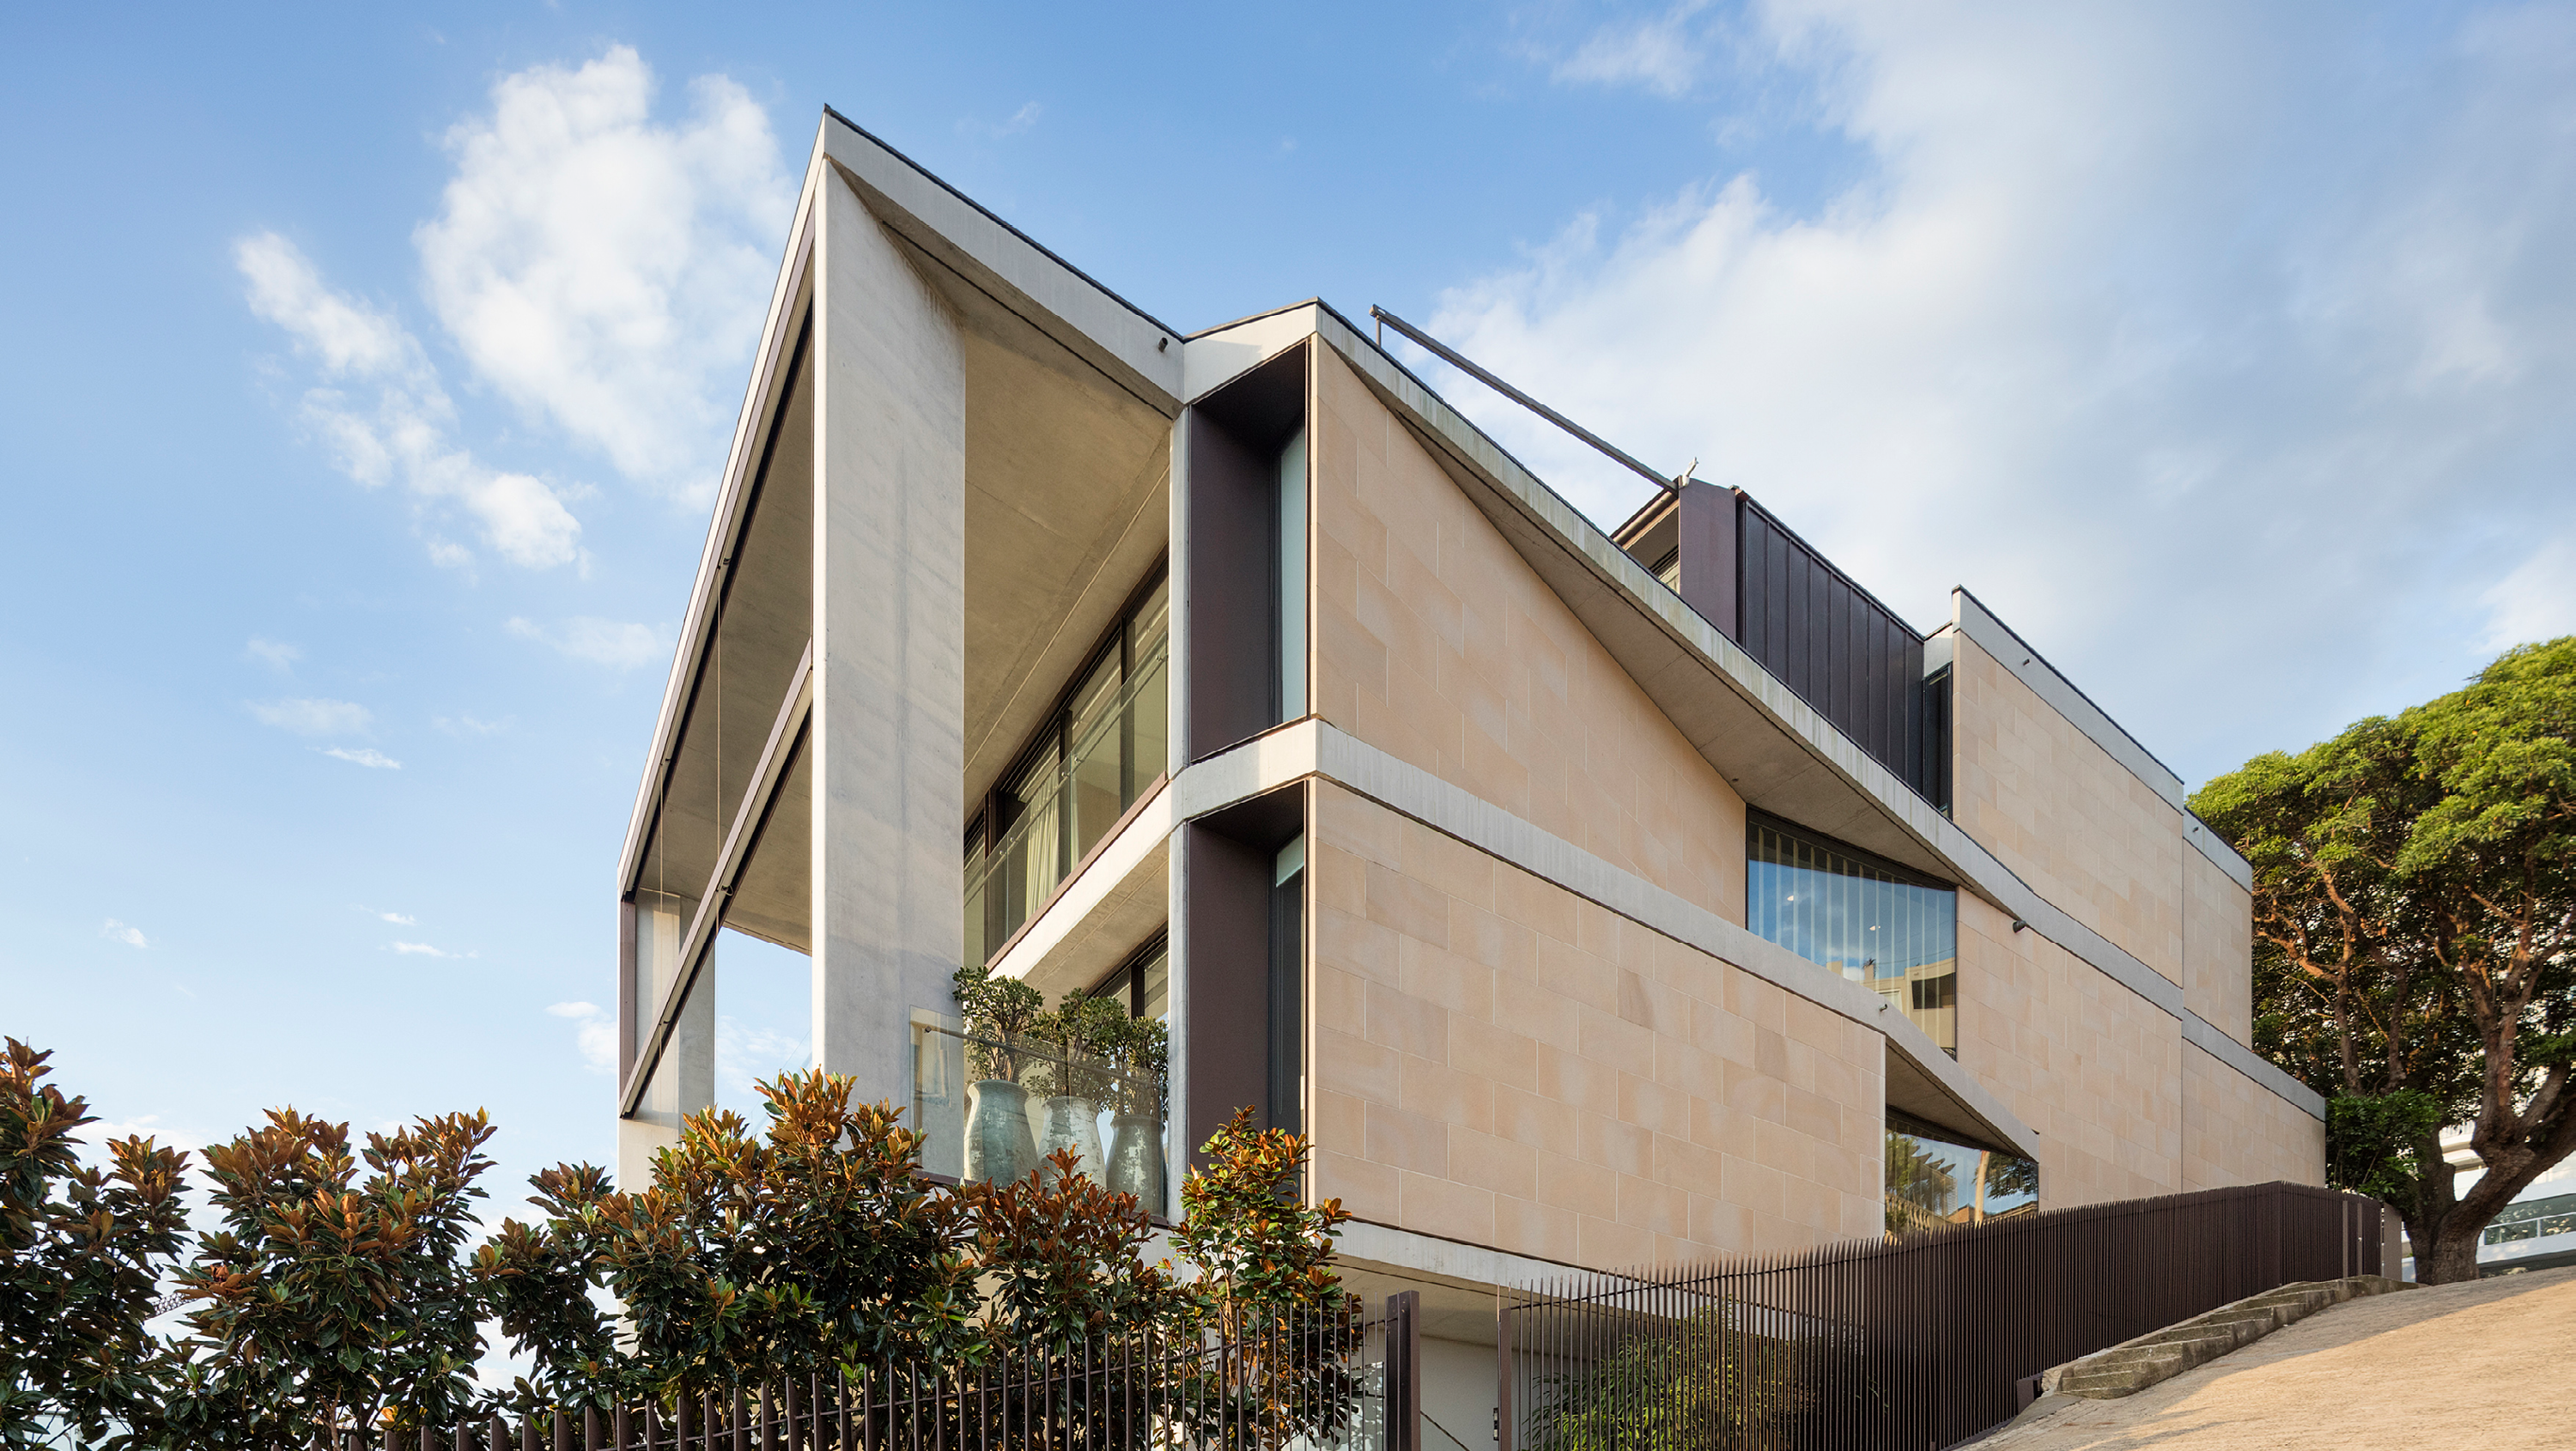 Photograph of the award-wining Point Piper Residence exterior designed by Tzannes